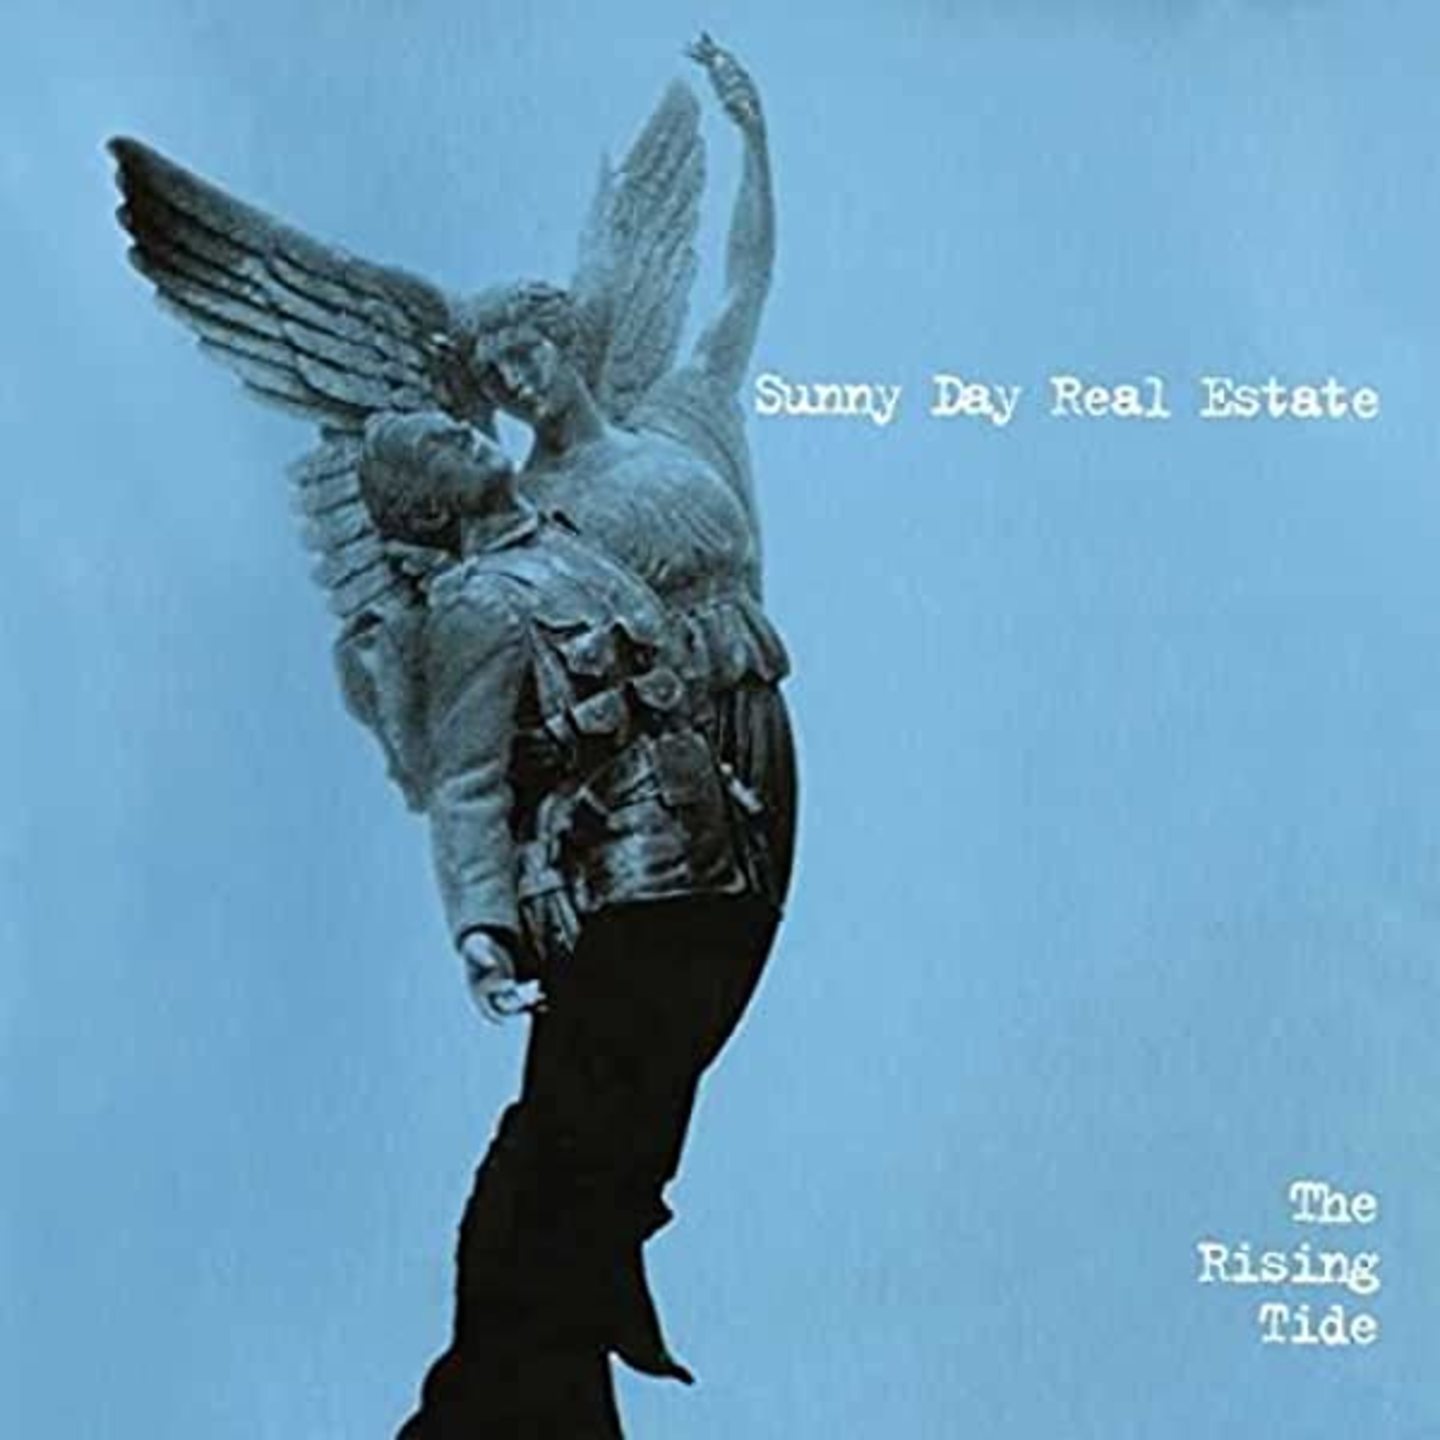 SUNNY DAY REAL ESTATE - The Rising Tide 2xLP